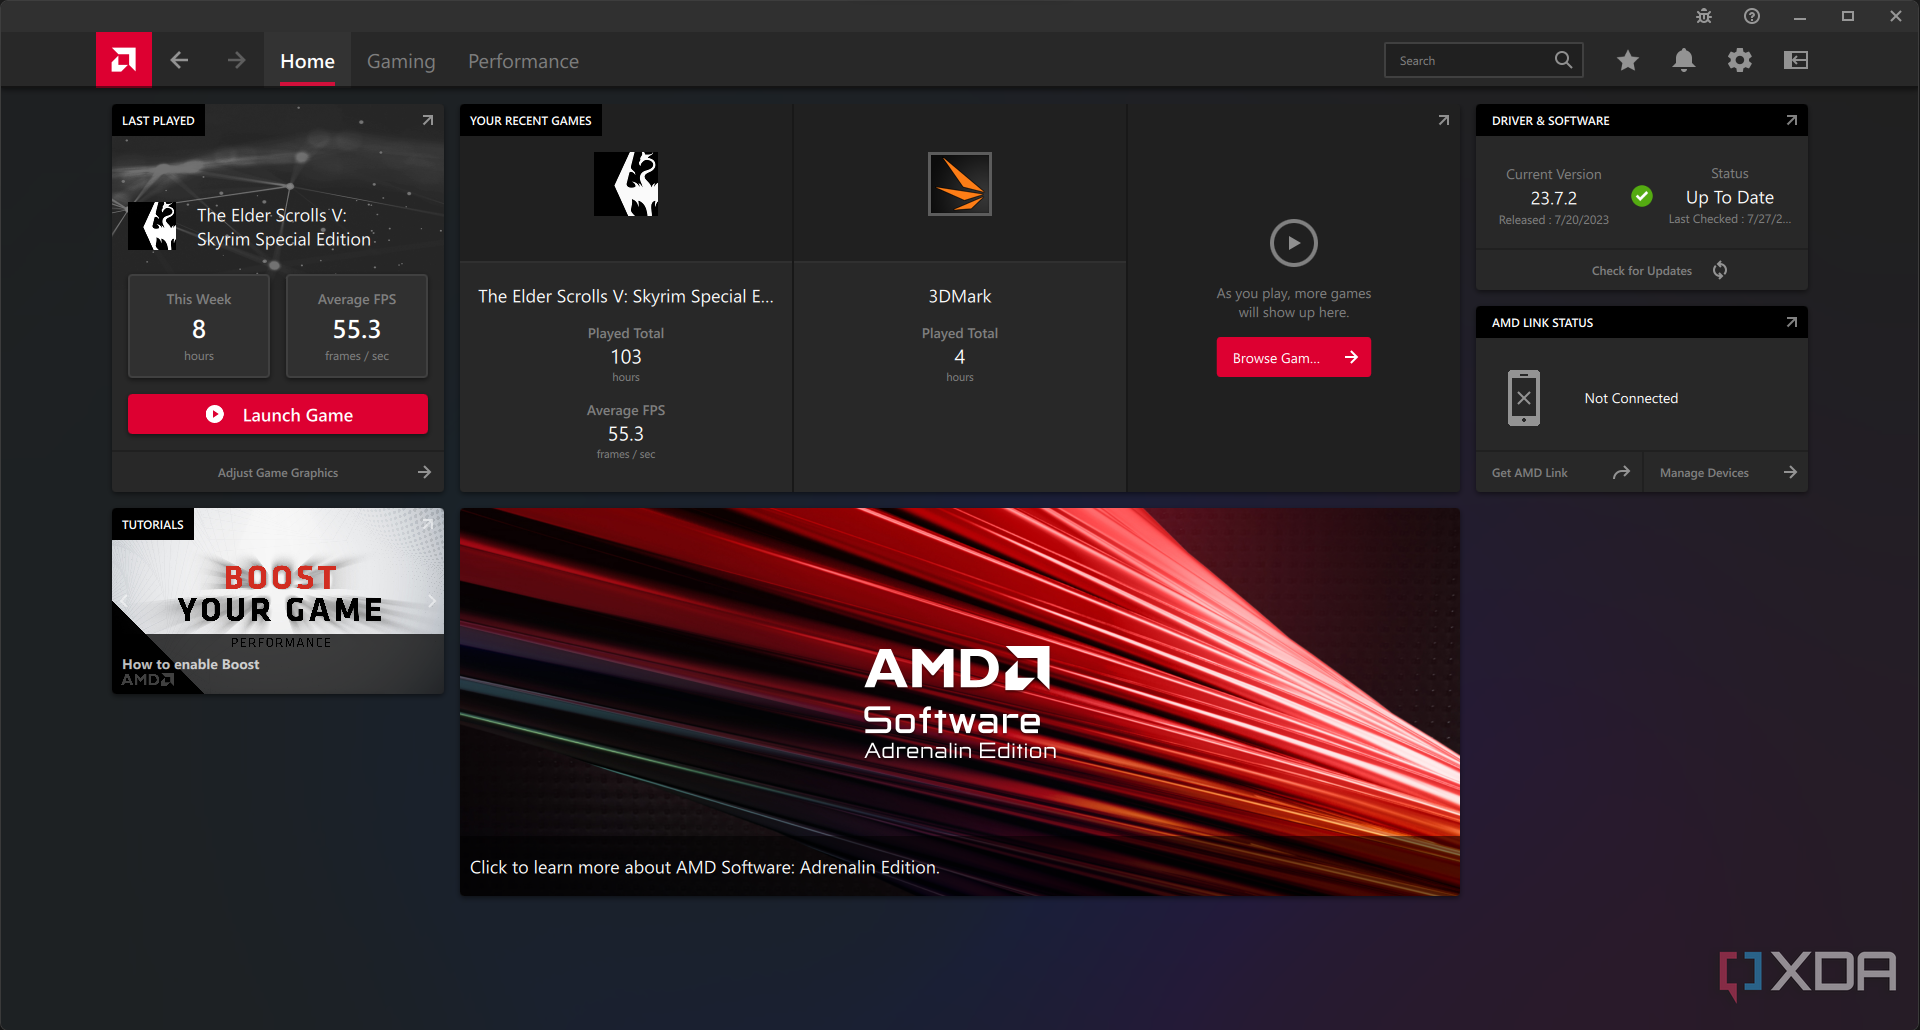 The home tab in AMD Radeon Adrenaline software.